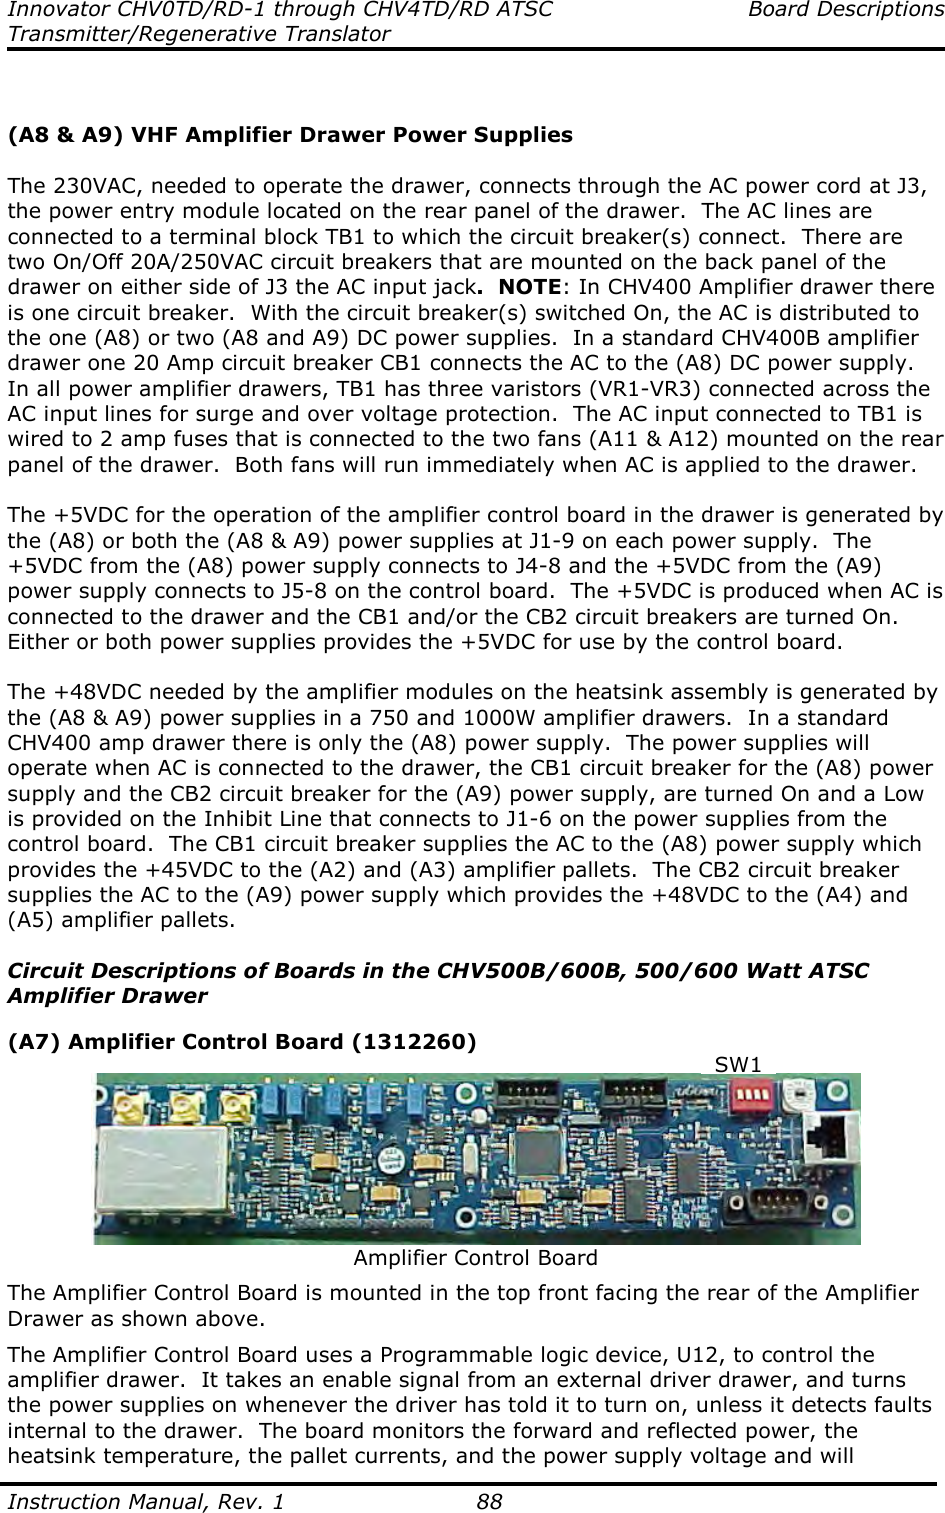 Innovator CHV0TD/RD-1 through CHV4TD/RD ATSC  Board Descriptions Transmitter/Regenerative Translator  Instruction Manual, Rev. 1    88   (A8 &amp; A9) VHF Amplifier Drawer Power Supplies  The 230VAC, needed to operate the drawer, connects through the AC power cord at J3, the power entry module located on the rear panel of the drawer.  The AC lines are connected to a terminal block TB1 to which the circuit breaker(s) connect.  There are two On/Off 20A/250VAC circuit breakers that are mounted on the back panel of the drawer on either side of J3 the AC input jack.  NOTE: In CHV400 Amplifier drawer there is one circuit breaker.  With the circuit breaker(s) switched On, the AC is distributed to the one (A8) or two (A8 and A9) DC power supplies.  In a standard CHV400B amplifier drawer one 20 Amp circuit breaker CB1 connects the AC to the (A8) DC power supply.  In all power amplifier drawers, TB1 has three varistors (VR1-VR3) connected across the AC input lines for surge and over voltage protection.  The AC input connected to TB1 is wired to 2 amp fuses that is connected to the two fans (A11 &amp; A12) mounted on the rear panel of the drawer.  Both fans will run immediately when AC is applied to the drawer.    The +5VDC for the operation of the amplifier control board in the drawer is generated by the (A8) or both the (A8 &amp; A9) power supplies at J1-9 on each power supply.  The +5VDC from the (A8) power supply connects to J4-8 and the +5VDC from the (A9) power supply connects to J5-8 on the control board.  The +5VDC is produced when AC is connected to the drawer and the CB1 and/or the CB2 circuit breakers are turned On.  Either or both power supplies provides the +5VDC for use by the control board.  The +48VDC needed by the amplifier modules on the heatsink assembly is generated by the (A8 &amp; A9) power supplies in a 750 and 1000W amplifier drawers.  In a standard CHV400 amp drawer there is only the (A8) power supply.  The power supplies will operate when AC is connected to the drawer, the CB1 circuit breaker for the (A8) power supply and the CB2 circuit breaker for the (A9) power supply, are turned On and a Low is provided on the Inhibit Line that connects to J1-6 on the power supplies from the control board.  The CB1 circuit breaker supplies the AC to the (A8) power supply which provides the +45VDC to the (A2) and (A3) amplifier pallets.  The CB2 circuit breaker supplies the AC to the (A9) power supply which provides the +48VDC to the (A4) and (A5) amplifier pallets.  Circuit Descriptions of Boards in the CHV500B/600B, 500/600 Watt ATSC Amplifier Drawer  (A7) Amplifier Control Board (1312260)   Amplifier Control Board The Amplifier Control Board is mounted in the top front facing the rear of the Amplifier Drawer as shown above.   The Amplifier Control Board uses a Programmable logic device, U12, to control the amplifier drawer.  It takes an enable signal from an external driver drawer, and turns the power supplies on whenever the driver has told it to turn on, unless it detects faults internal to the drawer.  The board monitors the forward and reflected power, the heatsink temperature, the pallet currents, and the power supply voltage and will SW1 